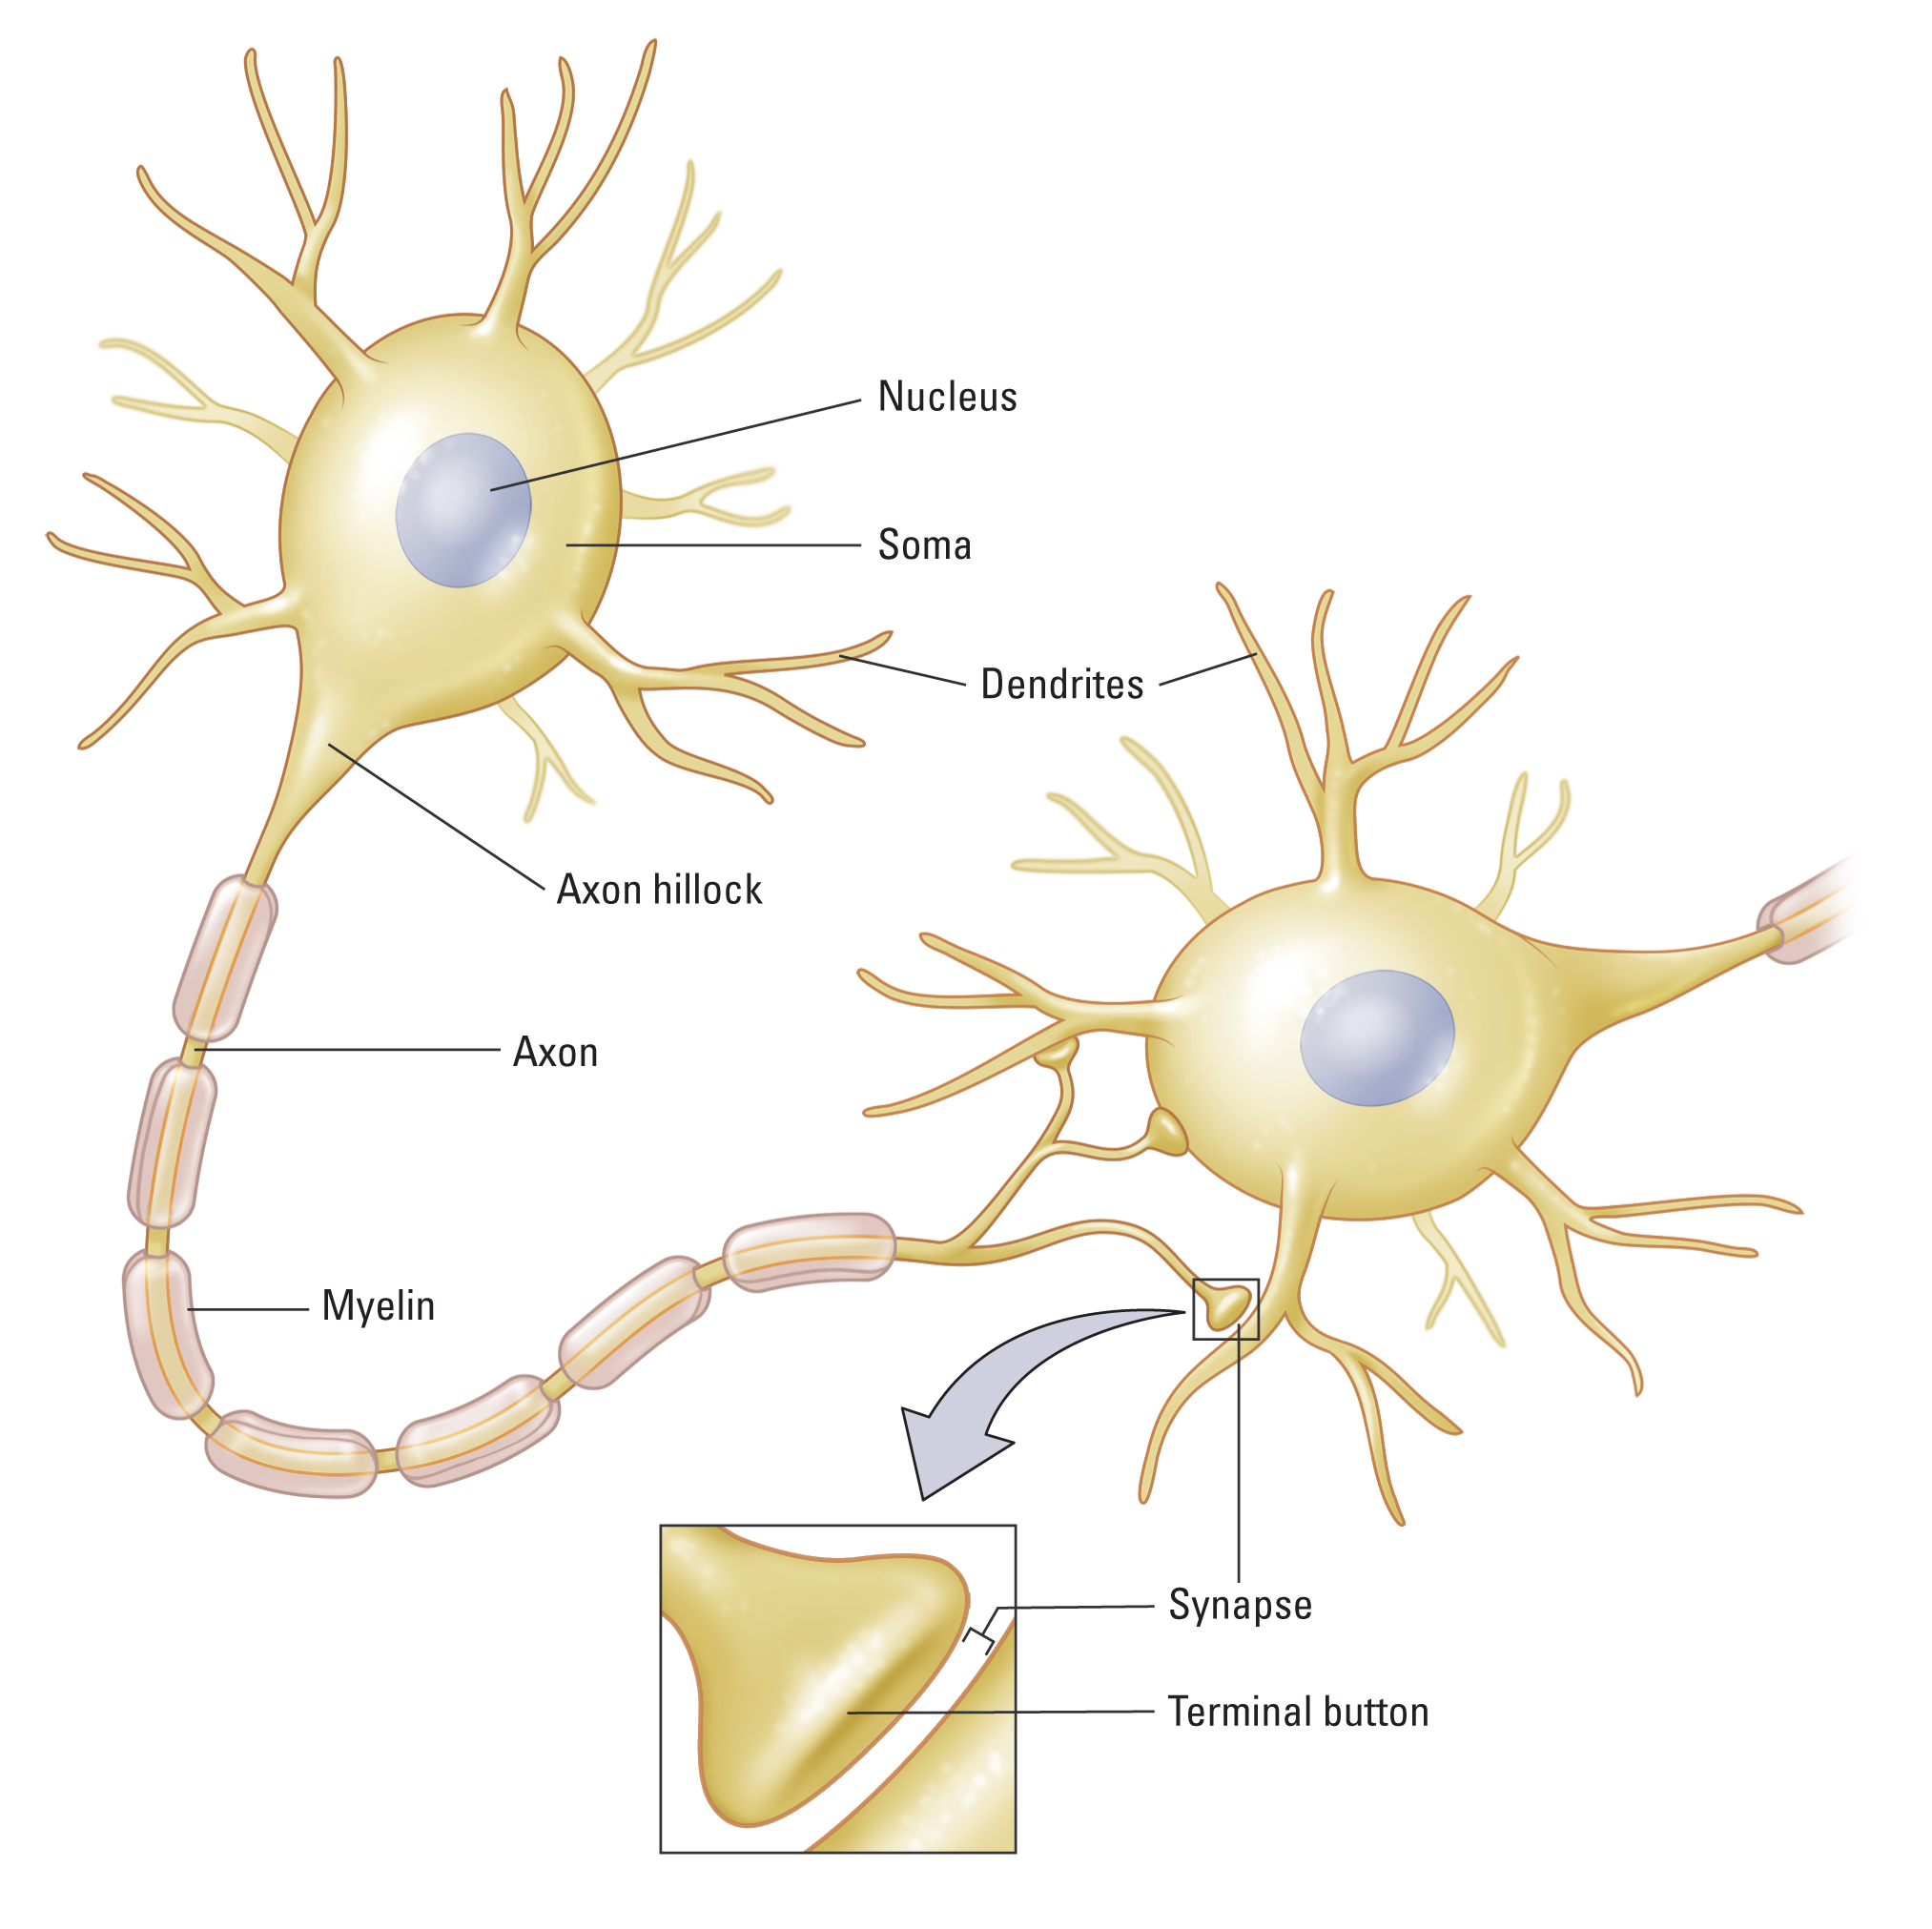 Structure of a neuron. The soma is its bulbous part which contains nucleus in the center. There are several short branched extensions of the cell which are called dendrites. The cell also has one long and slender projection named axon. Axon arises from the axon hillock which is the protrusion of the soma. Axon is covered with myelin sheath which is divided into segments interspersed with unmyelinated sections. Dilatation at the end of an axon is called terminal button. It moves closer to a dendrite of another neuron forming a synapse.